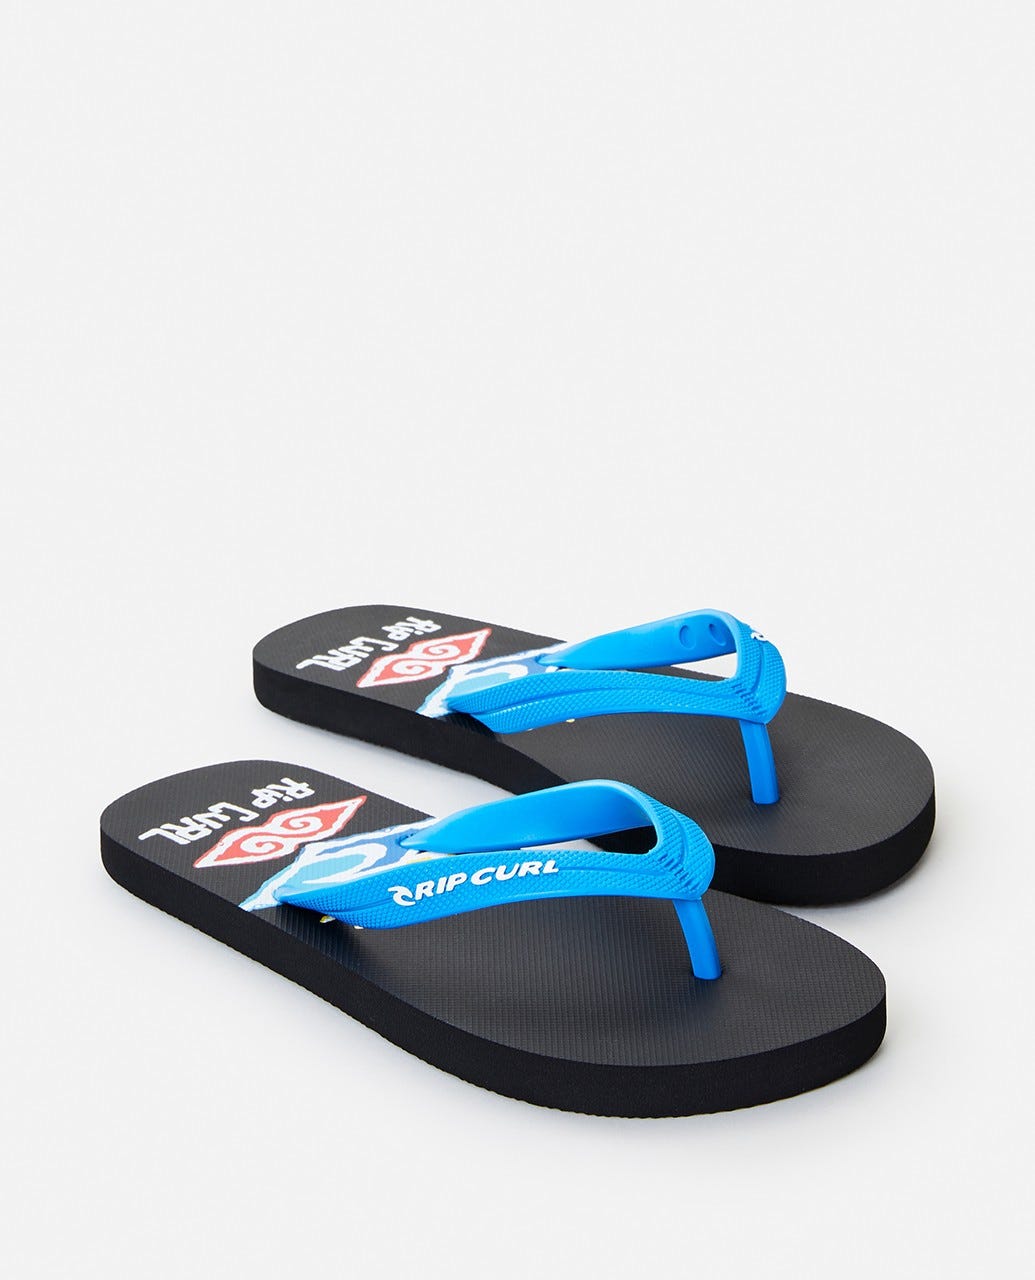 RIP CURL PAINTED SEARCHER OPEN TOE BO 16DBOT-0090 FLIP FLOP (YB)